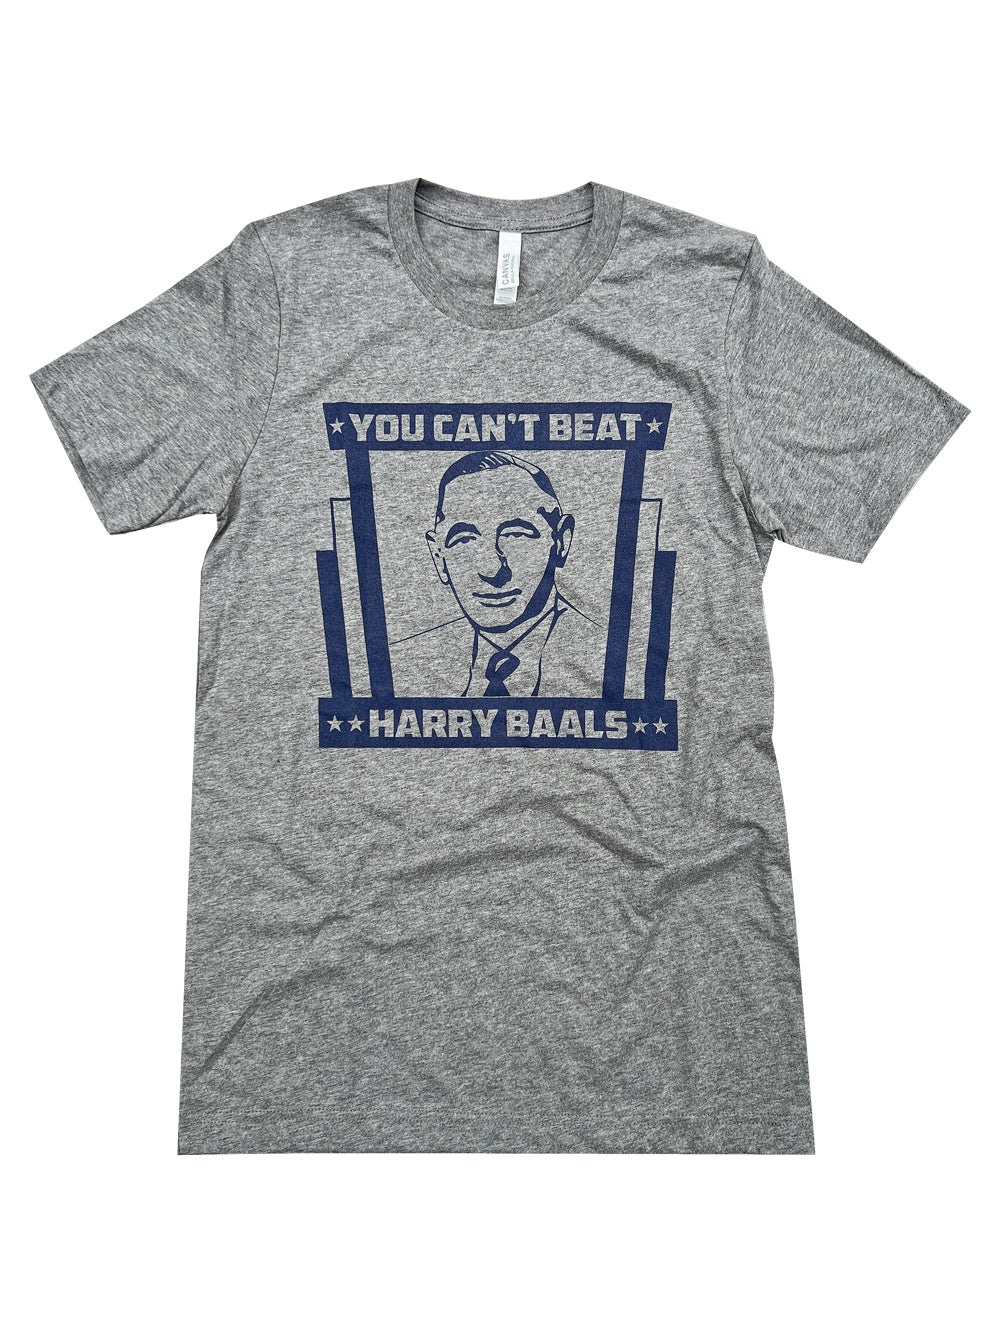 You Can't Beat Harry Baals gray t-shirt